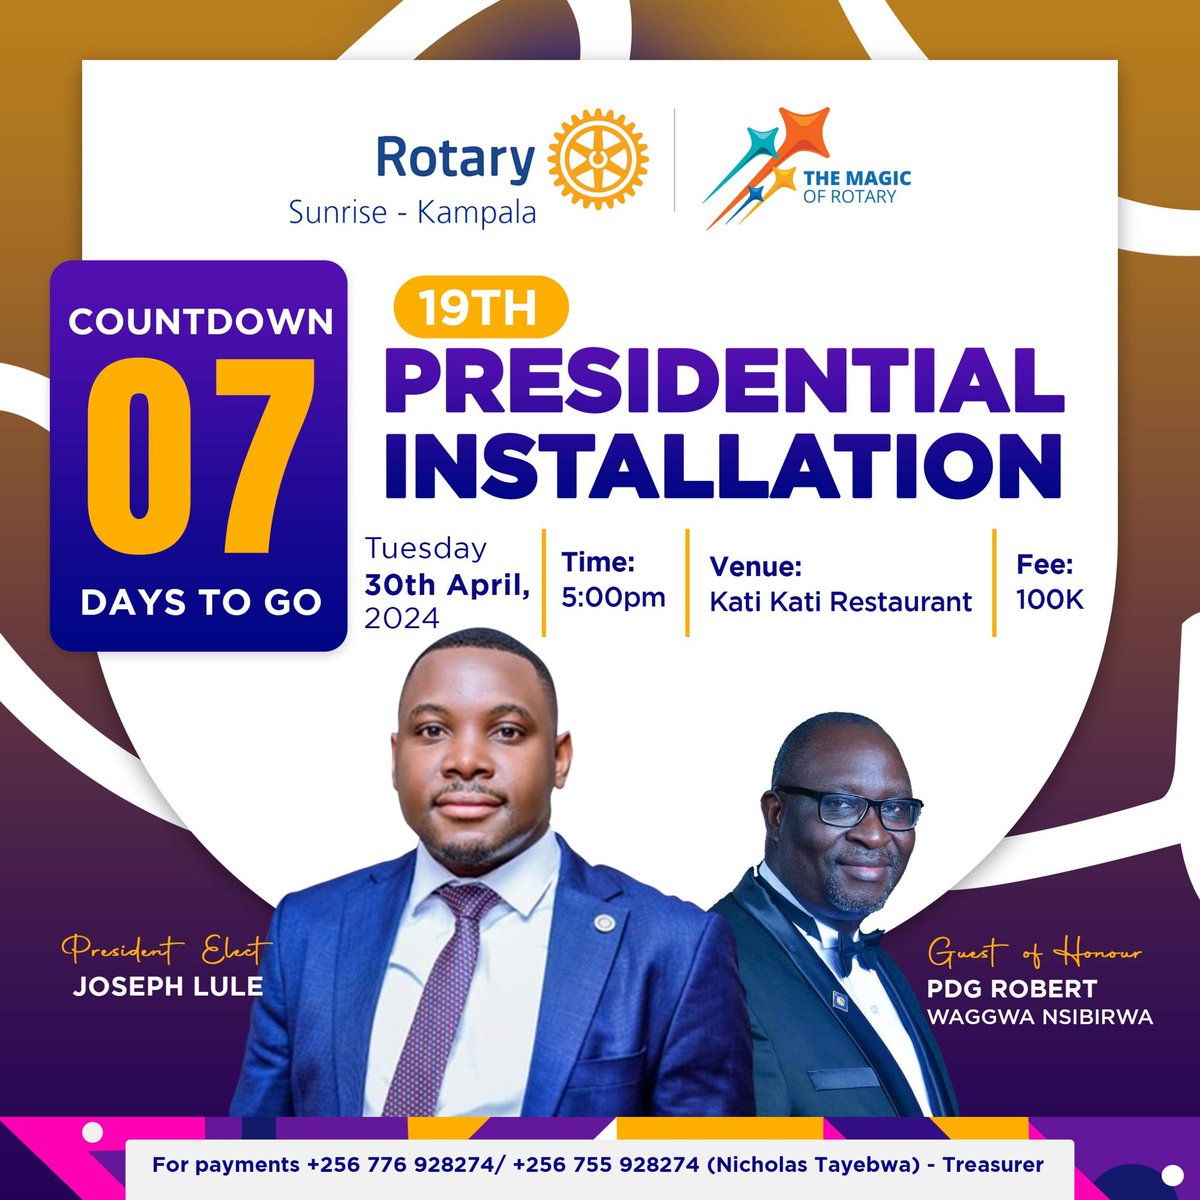 Get ready for a MAGICAL YEAR! Join us as we install our 19th President @Lulejoseph and usher in a new era of Service Above Self! @RotaryClubofSu2 presents: 'A New Dawn, A New Chapter' Expect inspiration, connection, and a dash of magic! #19ThPresidentialInstallation